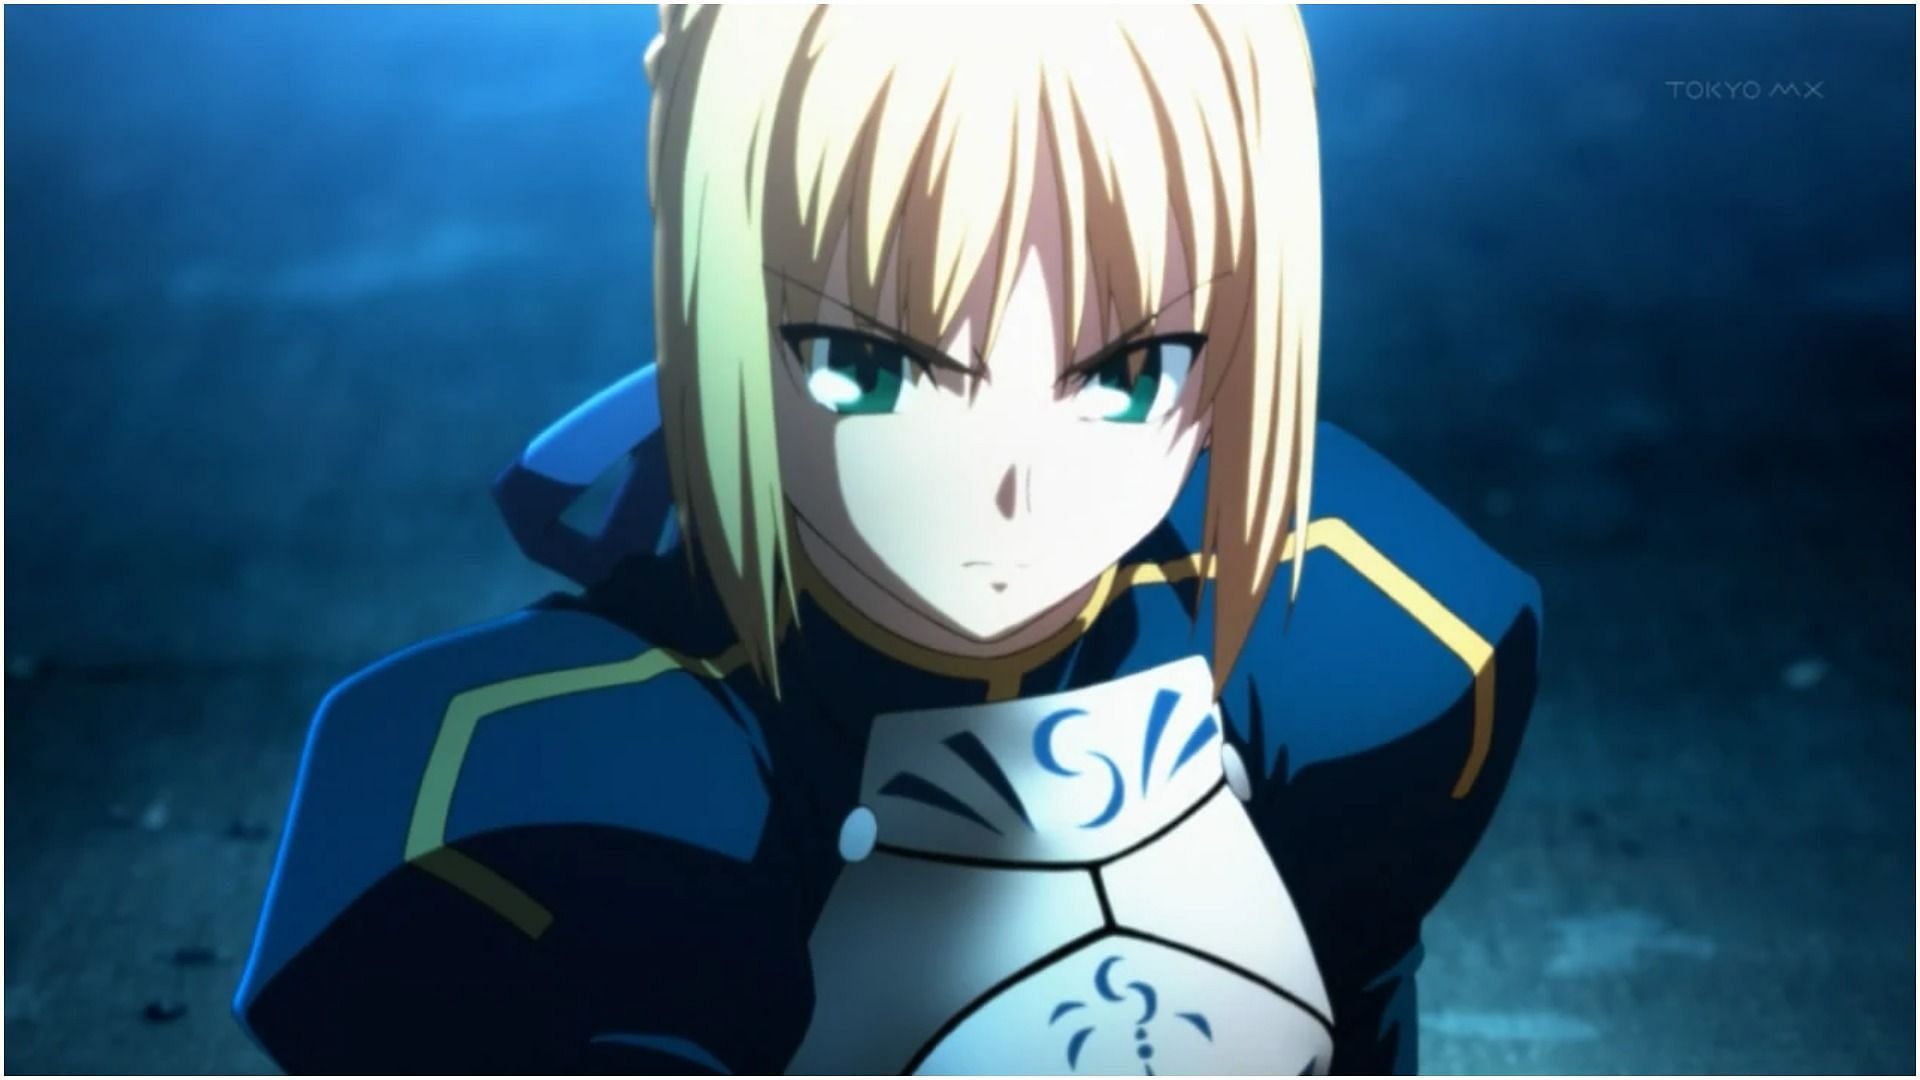 Saber as seen in the anime Fate/Stay (Image via Studio Deen)